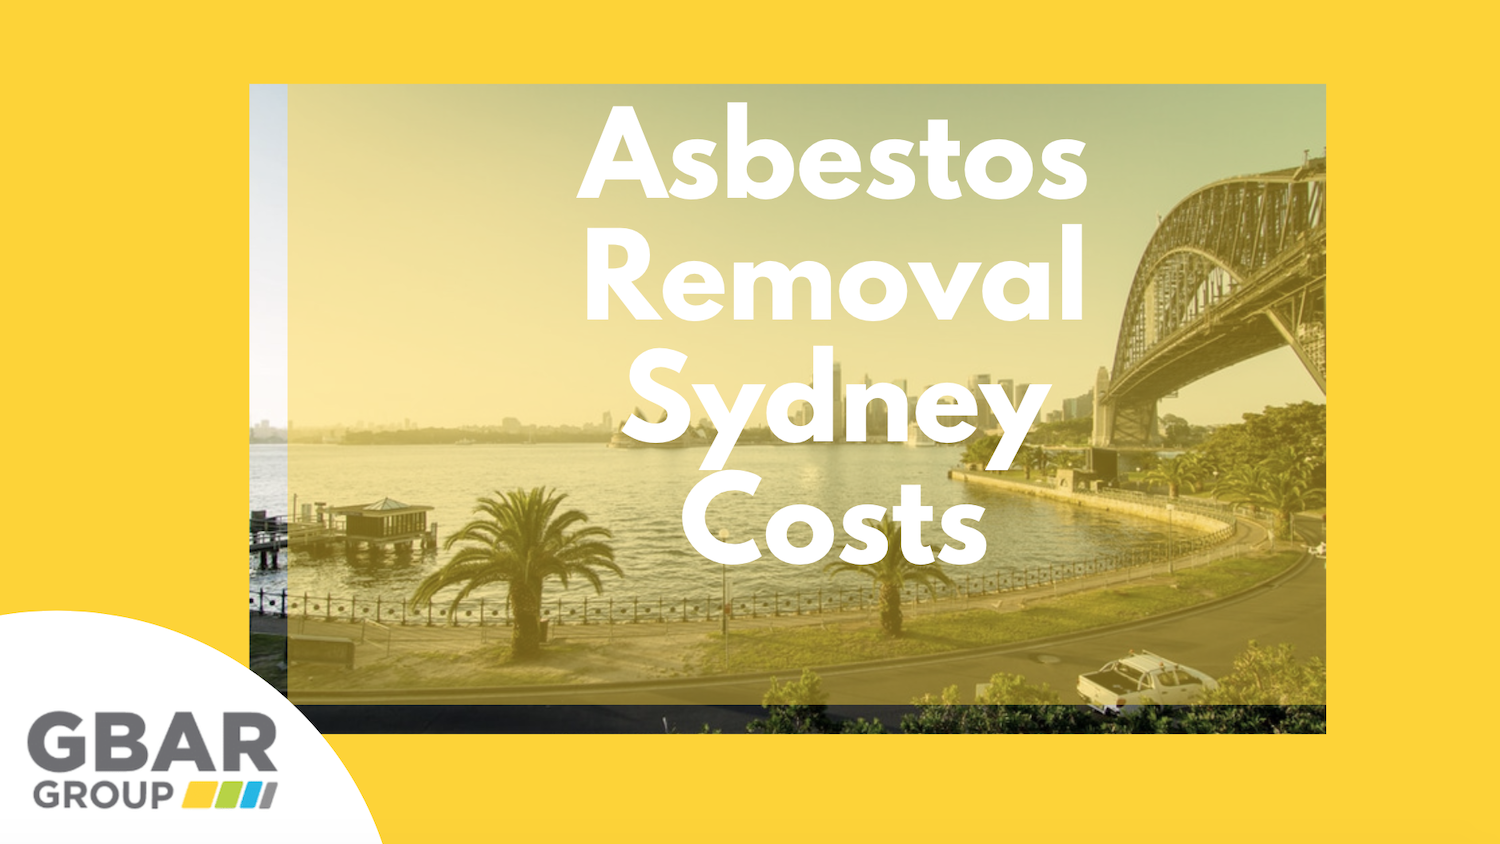 asbestos removal sydney costs - cover image